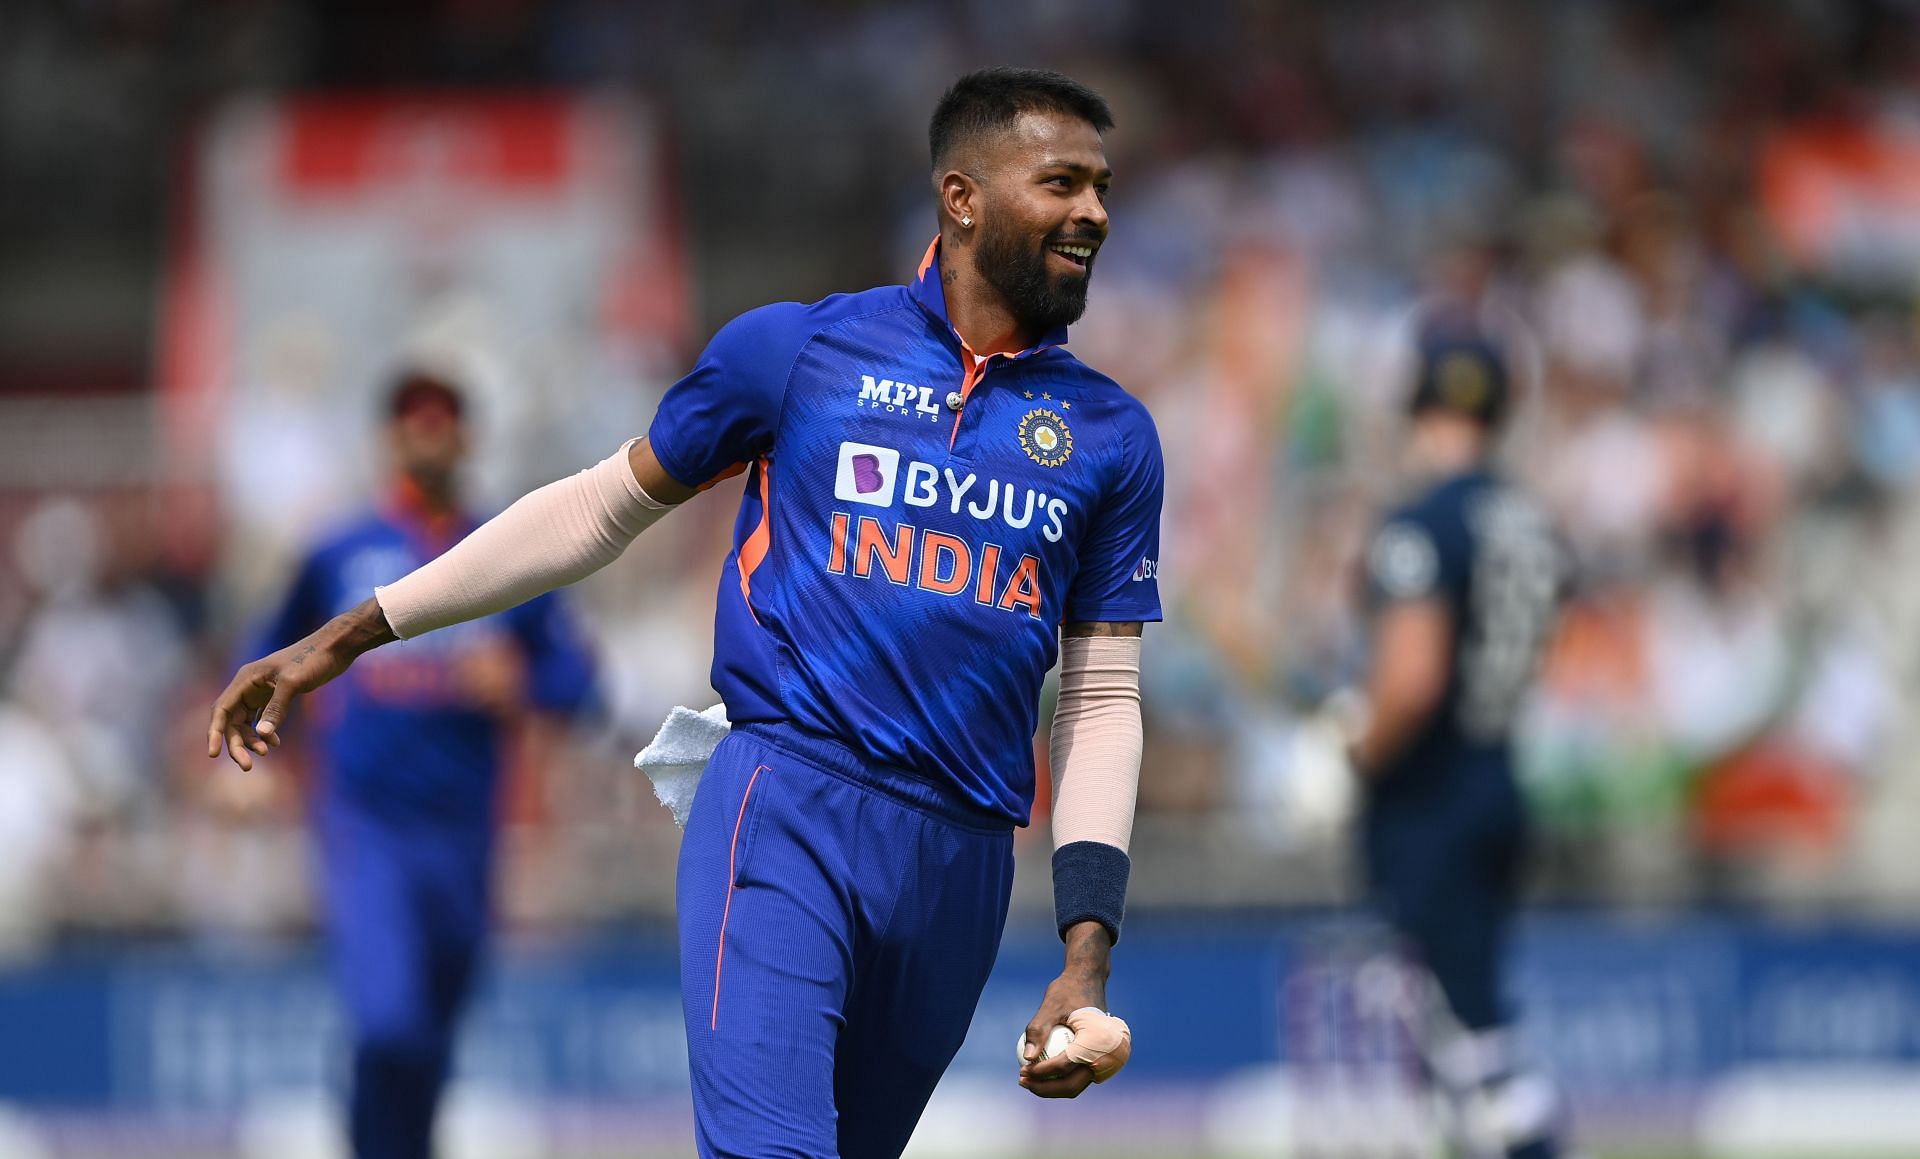 Hardik struggled as 3rd seamer for India in Asia Cup